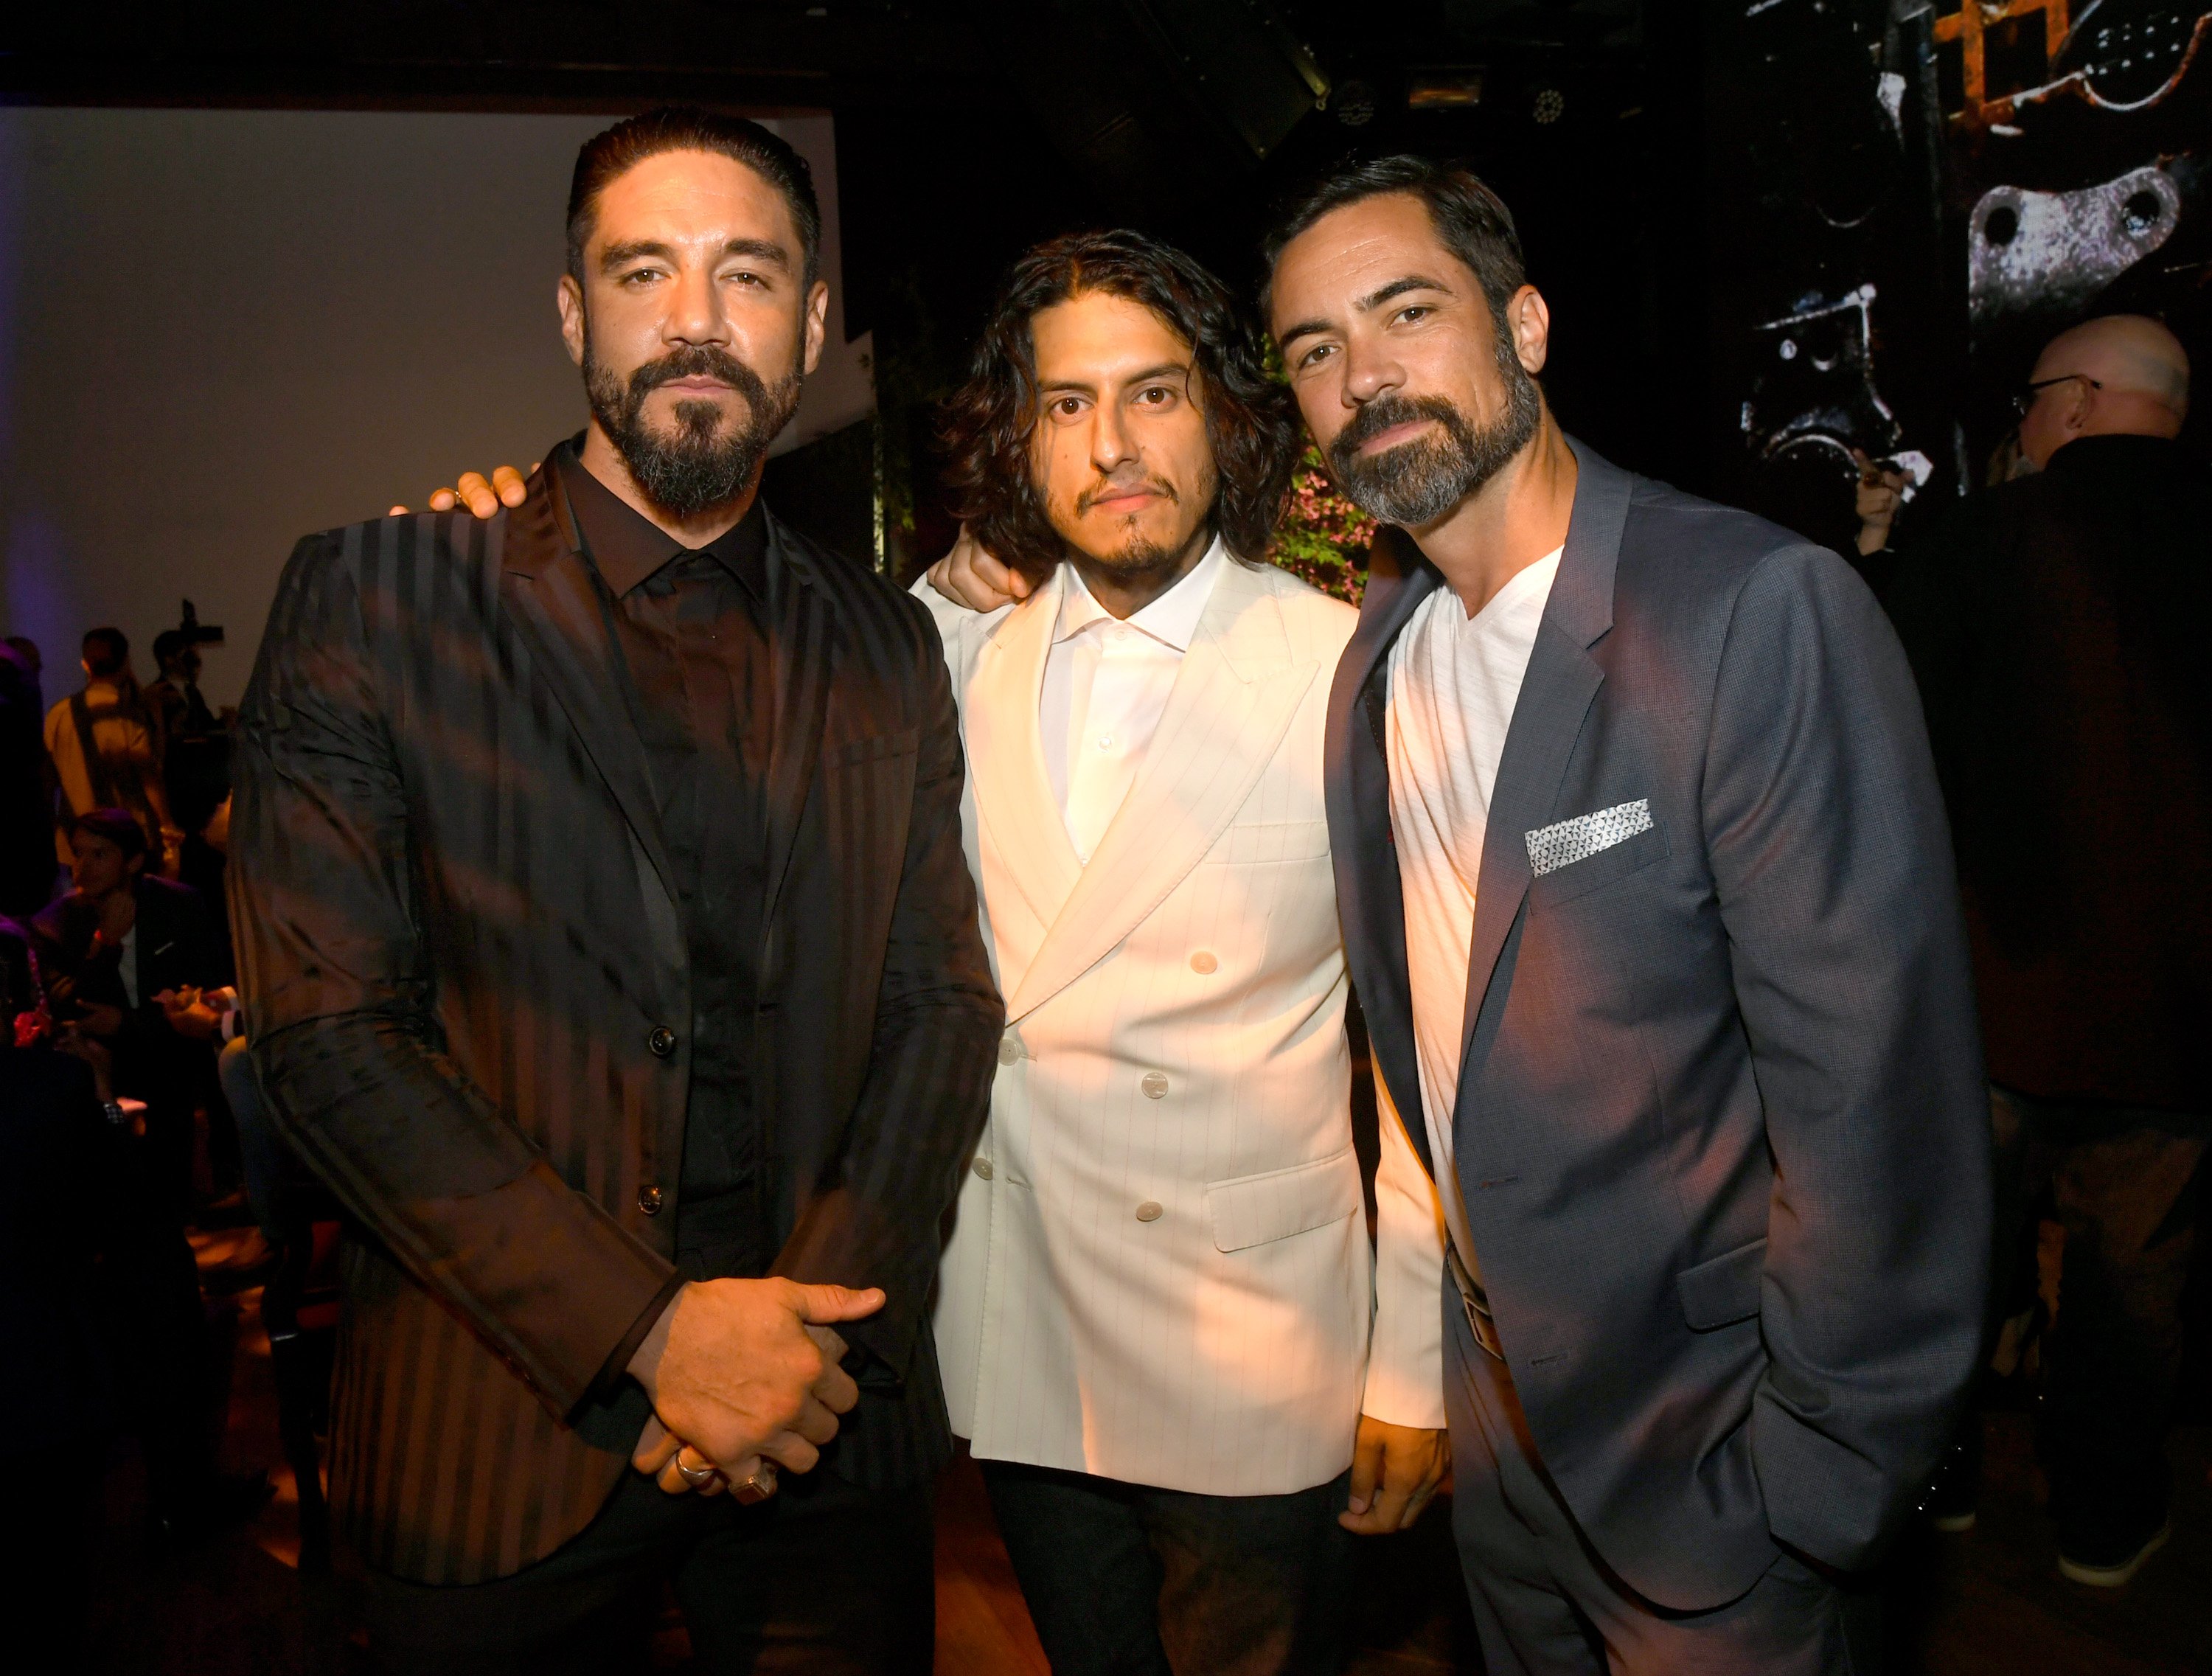 Clayton Cardenas, Richard Cabral and Danny Pino pose at the after party for the premiere of FX's "Mayans M.C." Season 2 at the Sunset Room on August 27, 2019